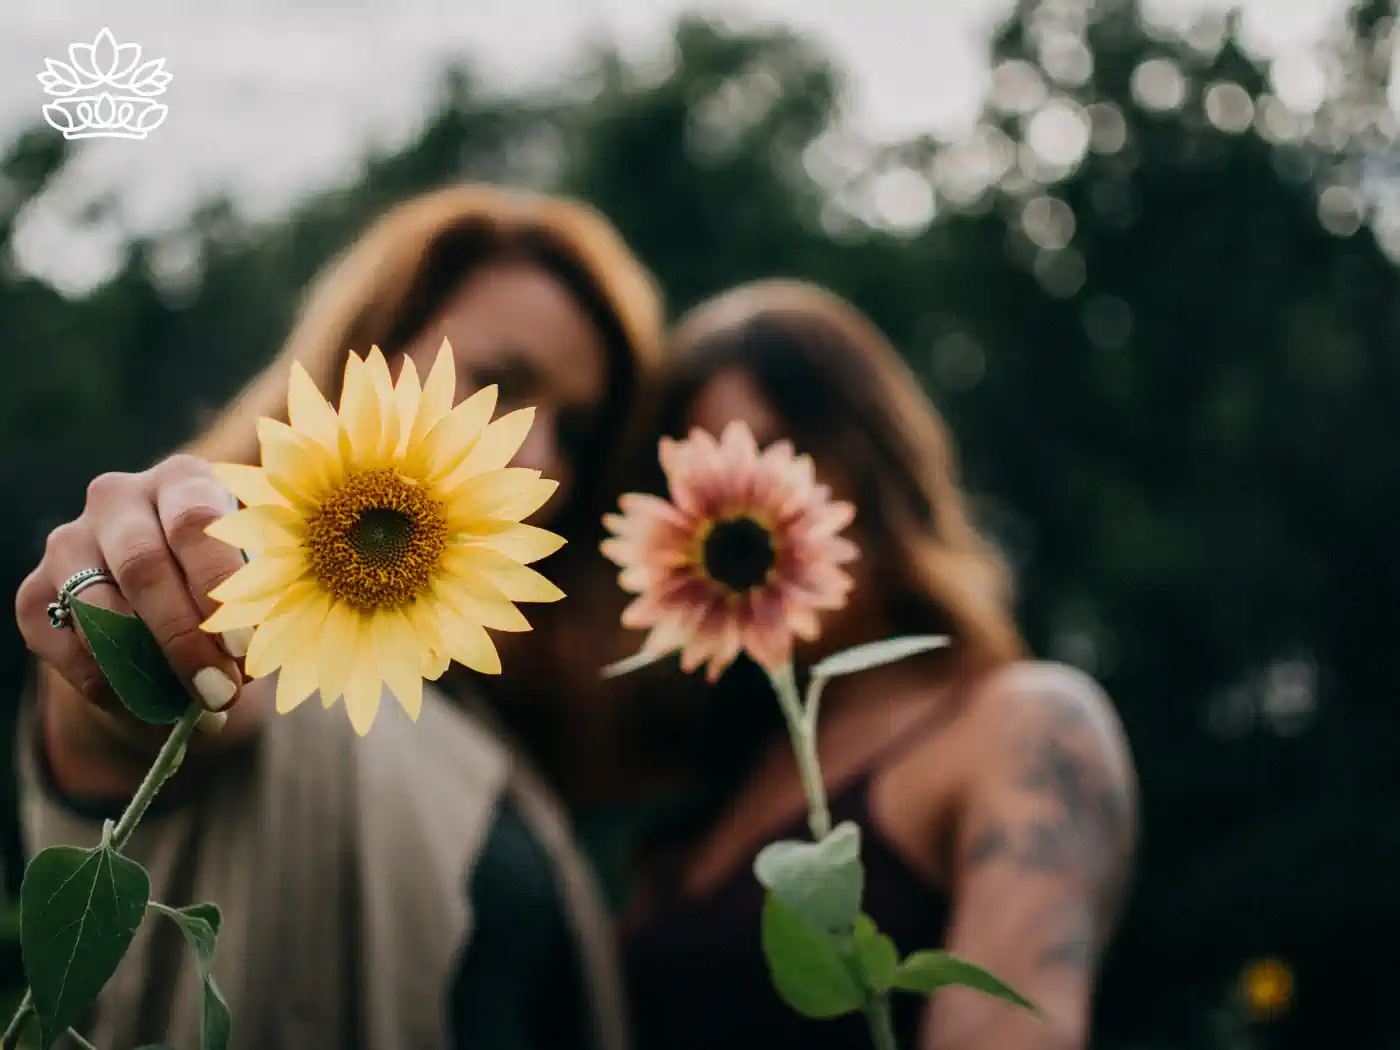 Two women holding sunflowers, with one woman in the background slightly out of focus. Fabulous Flowers and Gifts. Collection: Women's Day.